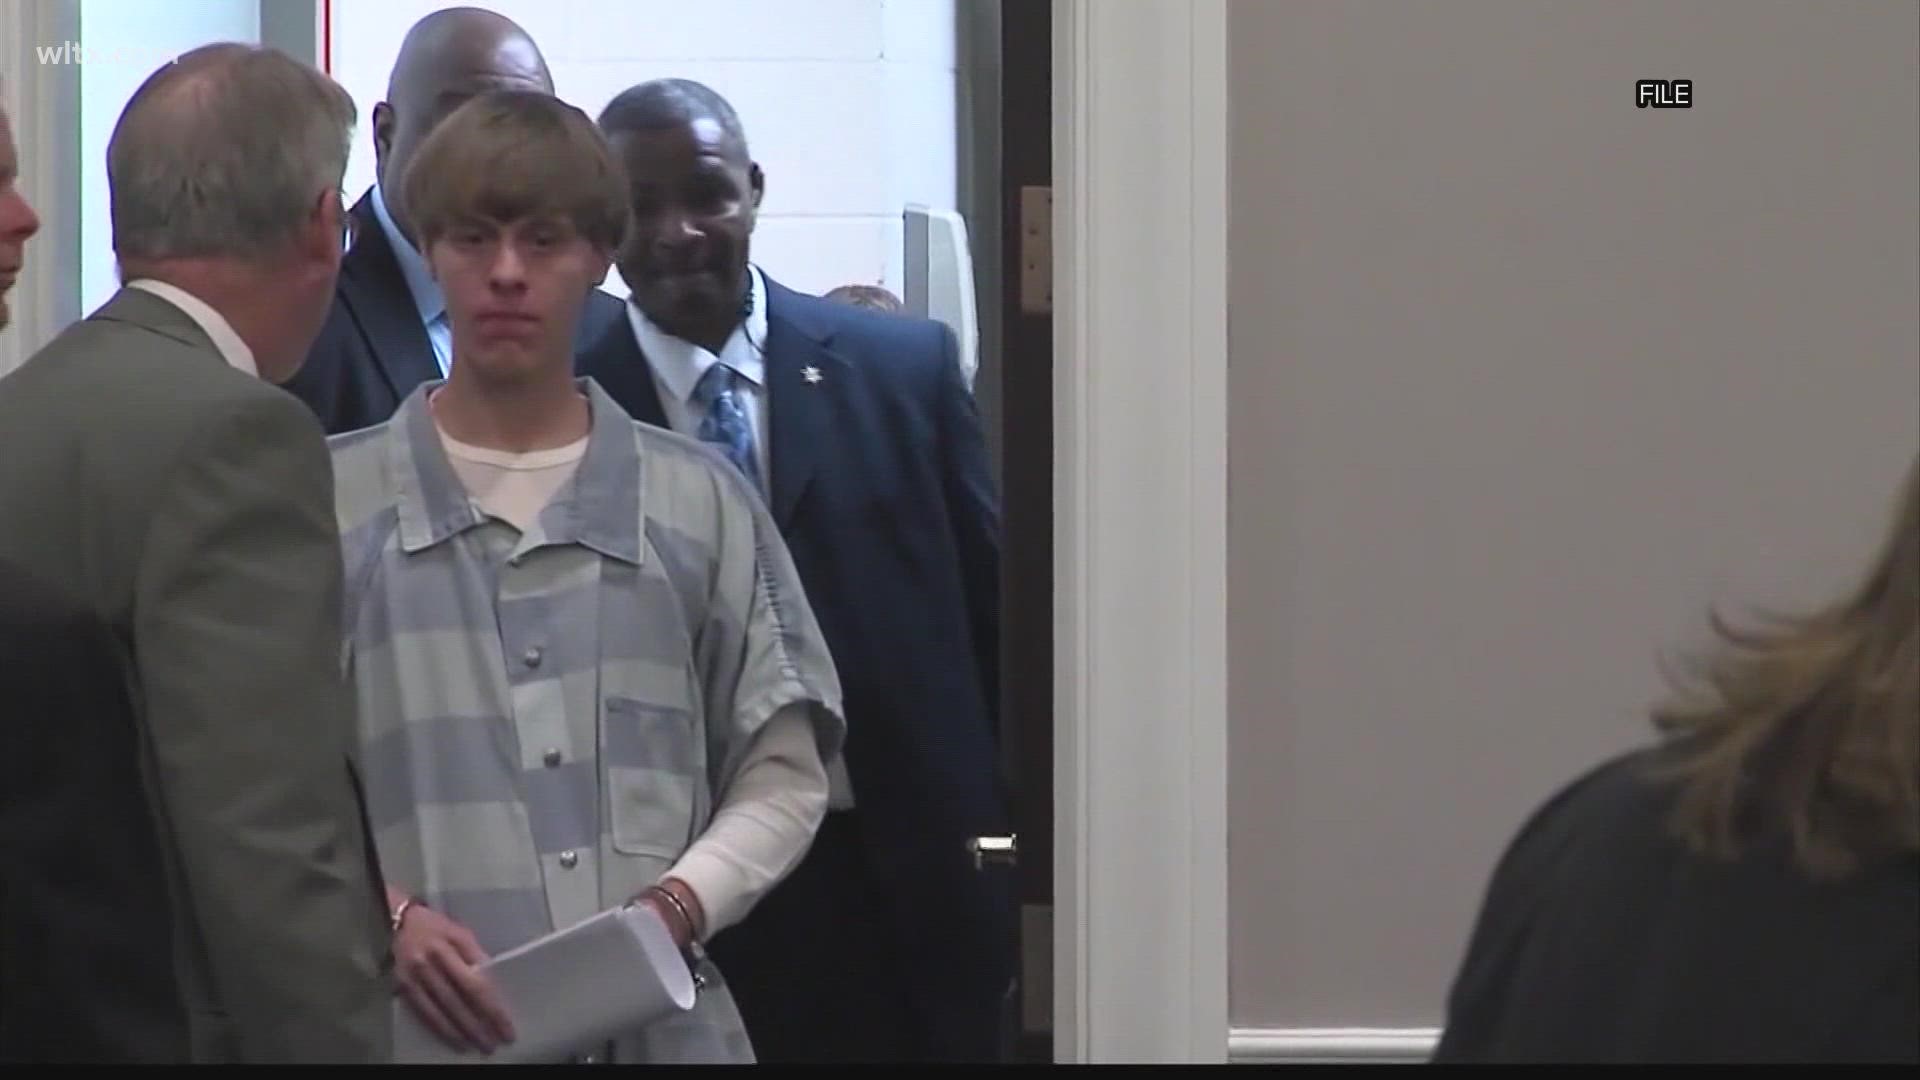 The Federal government has opposed Dylann Roof’s request for a new appellate hearing, arguing the SC man was properly convicted for the 2015 Charleston massacre.